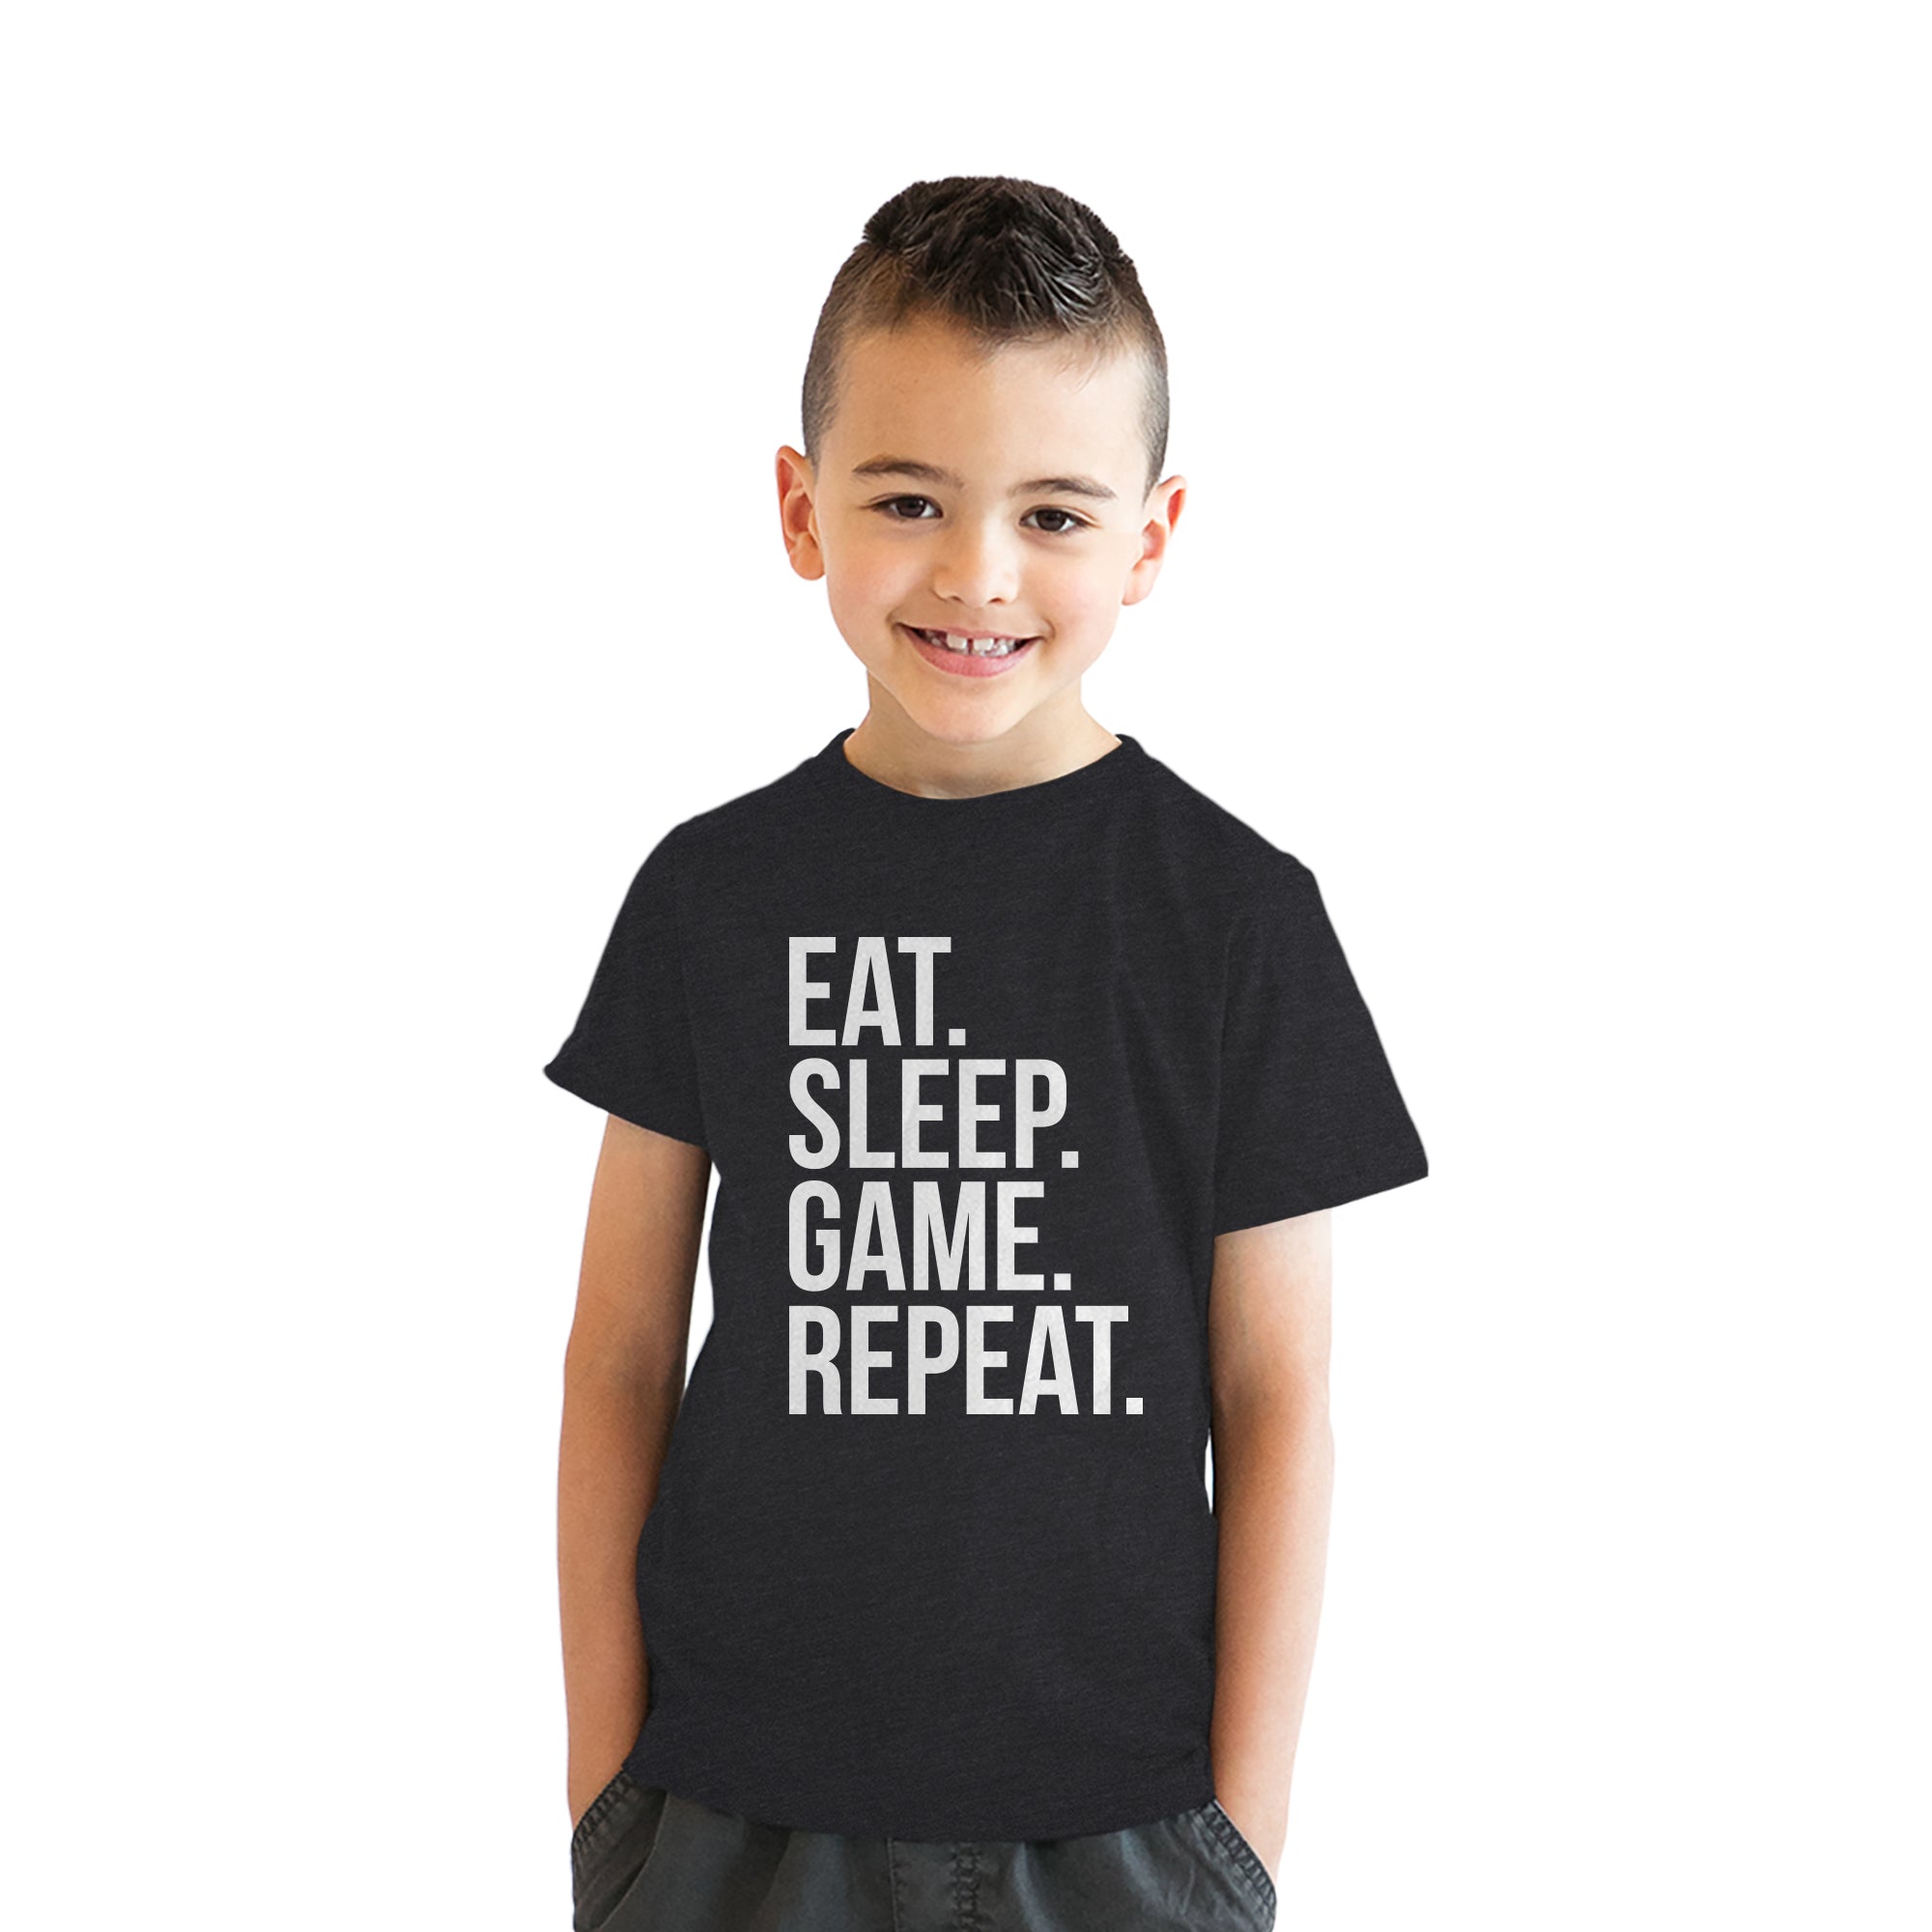 Funny Heather Black - GAME Eat Sleep Game Repeat Youth T Shirt Nerdy Nerdy Video Games Tee